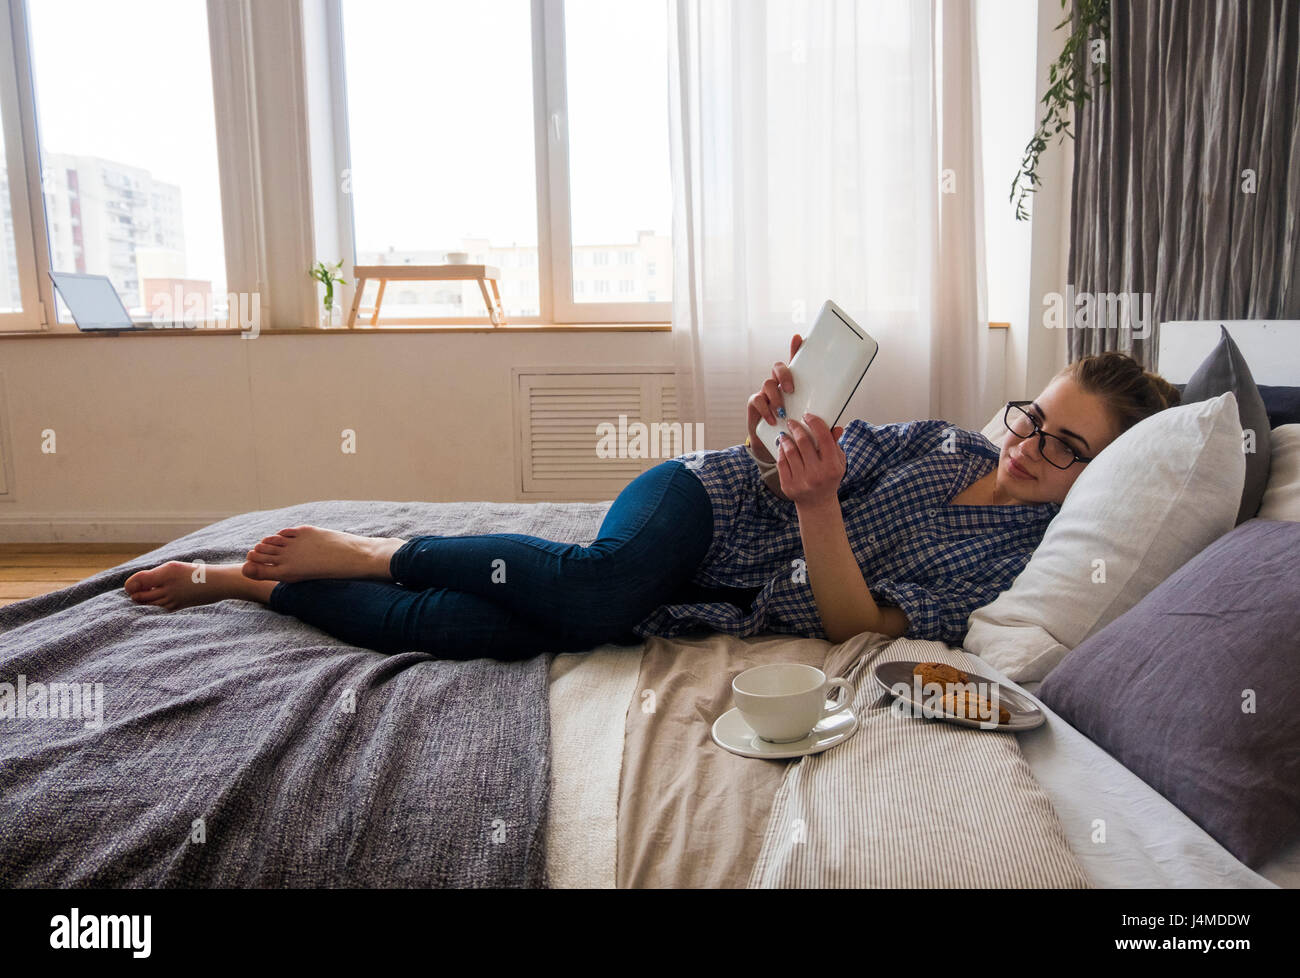 Caucasian woman laying on bed reading digital tablet Stock Photo